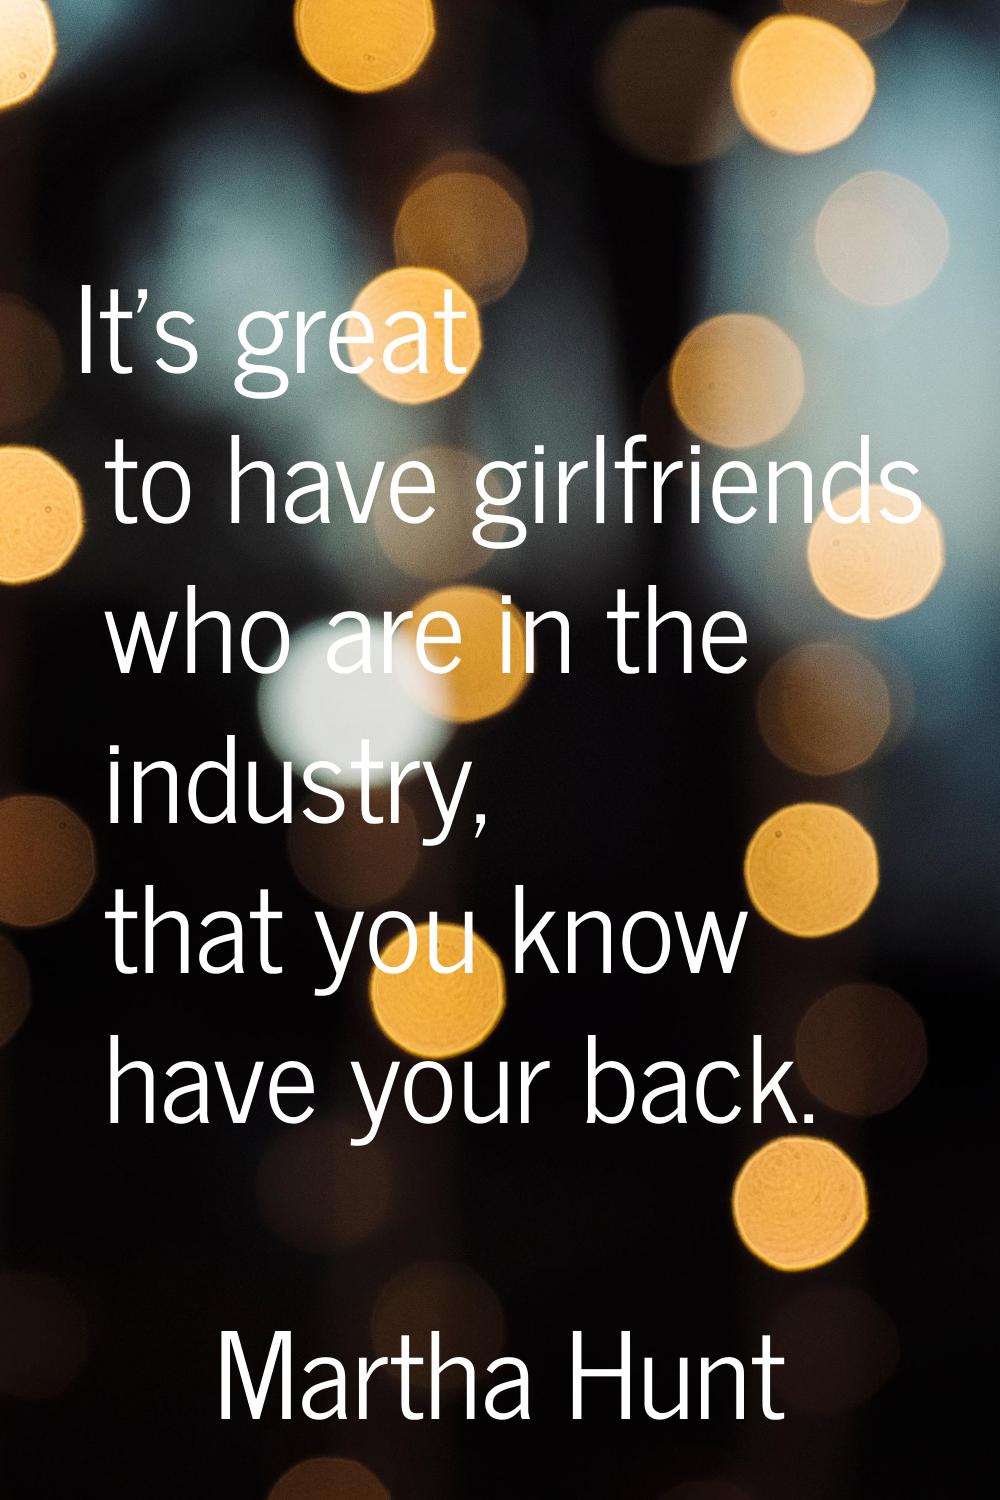 It's great to have girlfriends who are in the industry, that you know have your back.